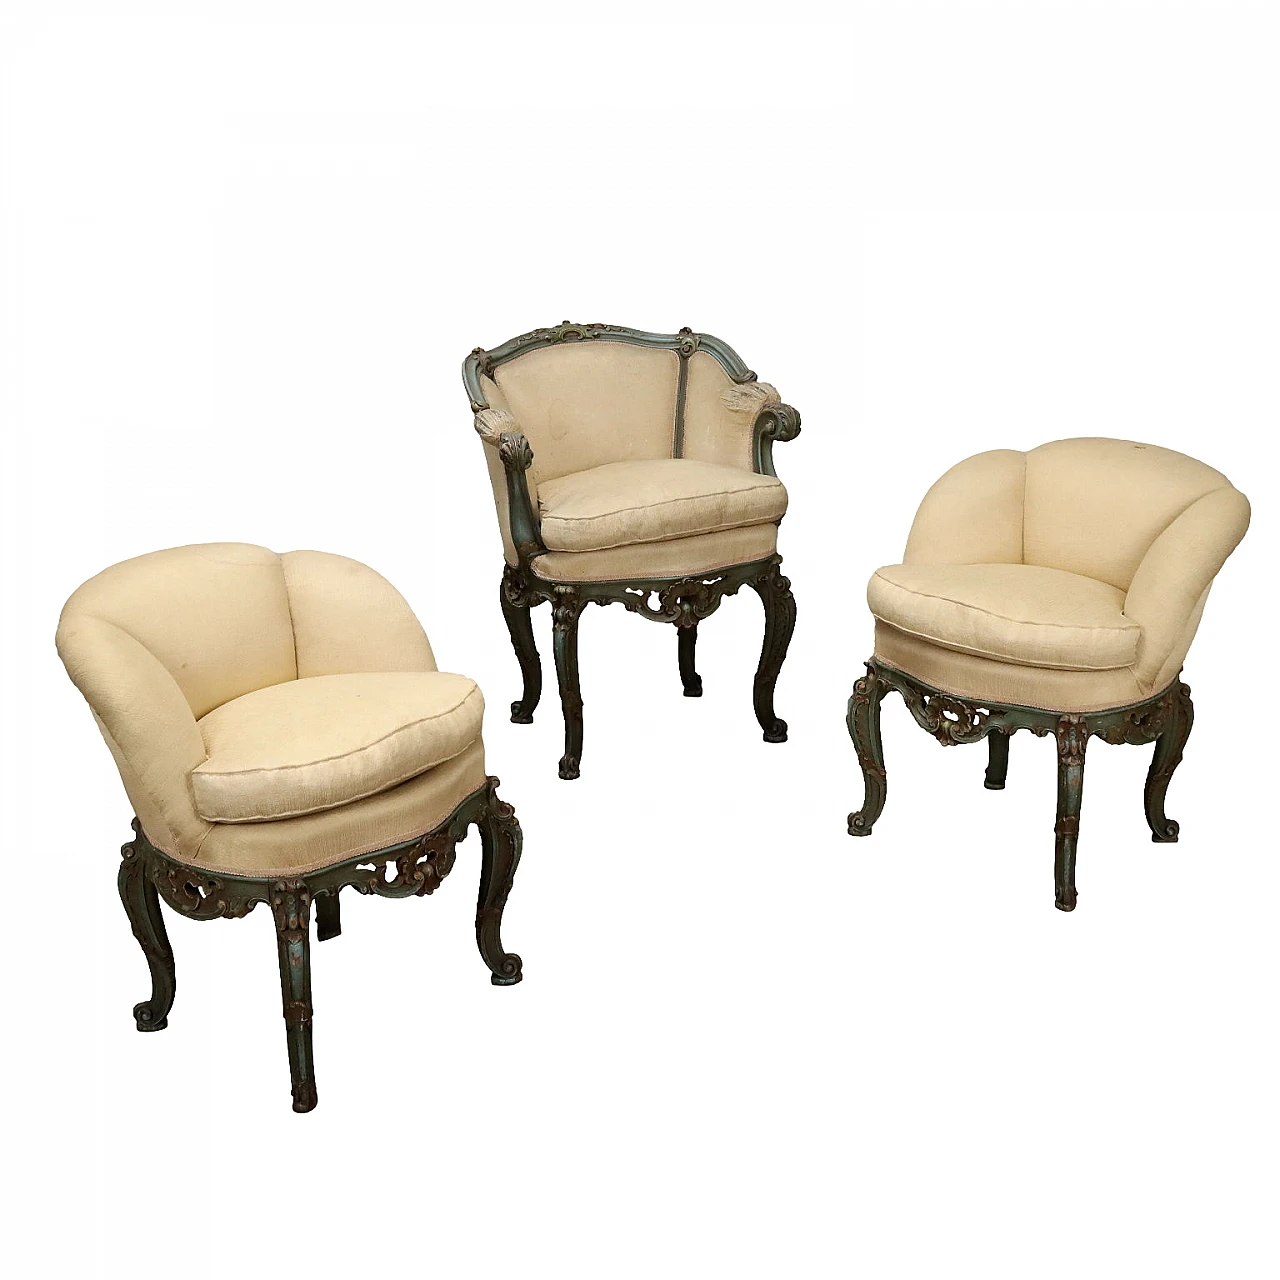 3 Laquered wood armchairs with wavy legs and rocaille motifs 1